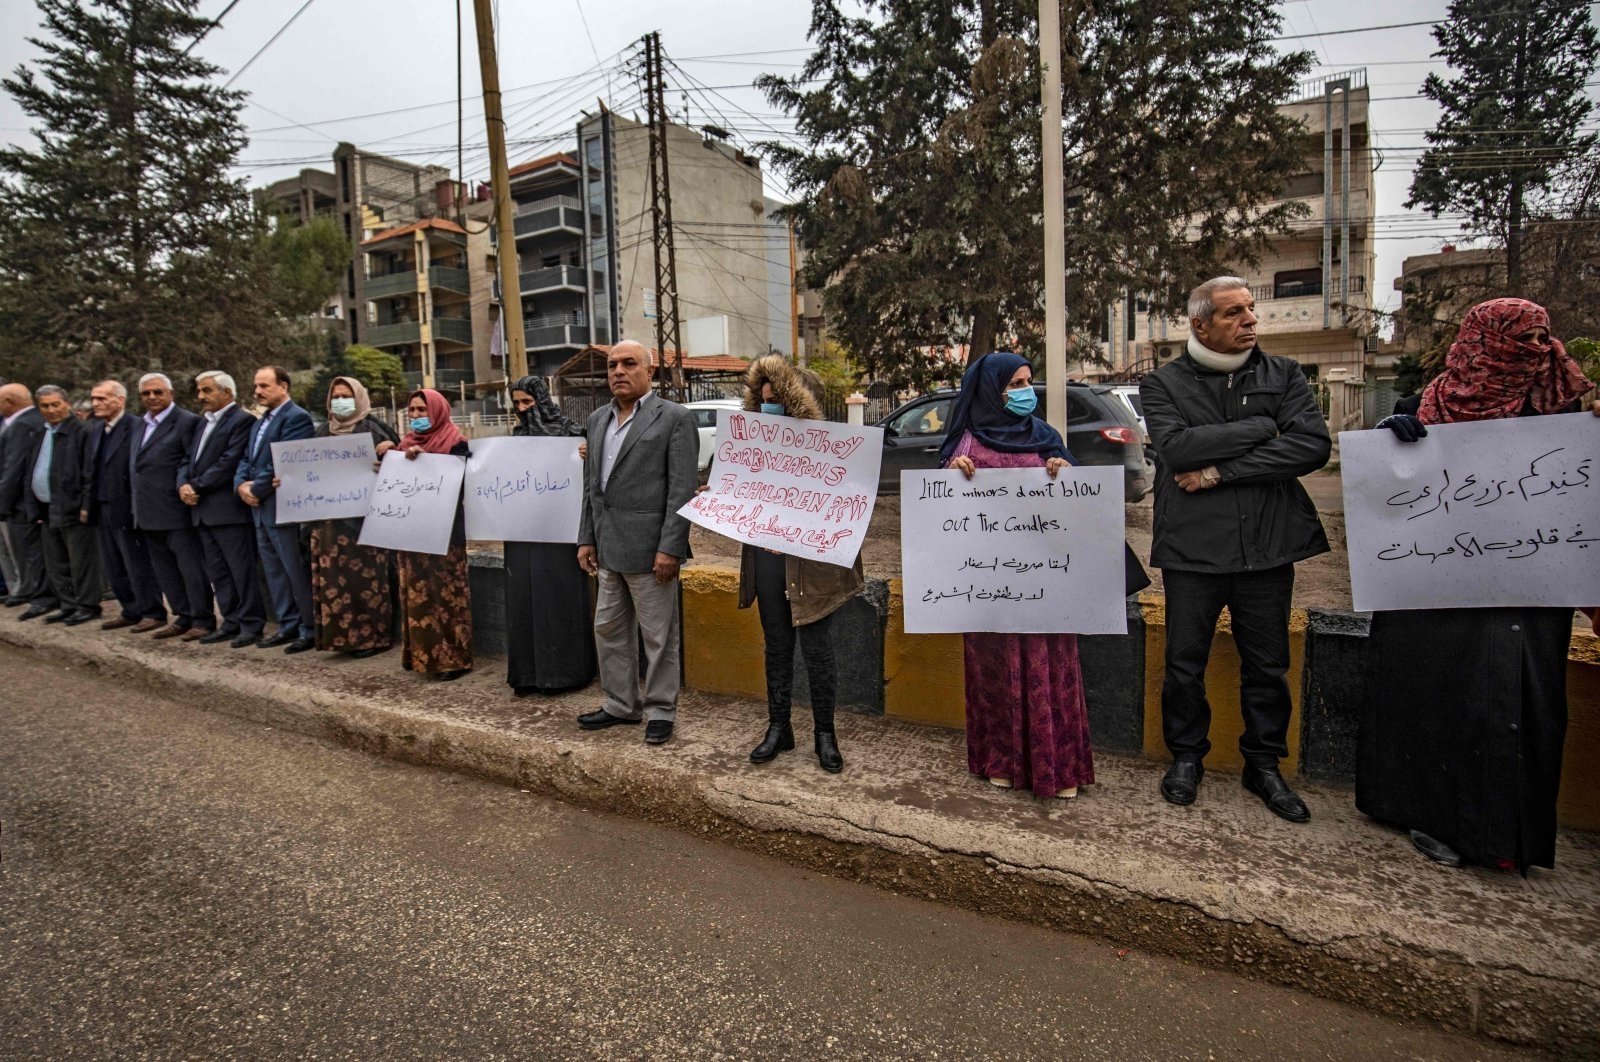 Kurdish parents demonstrate outside a U.N. building, calling on authorities to help release young girls they say were abducted and recruited into fighting by YPG/PKK, in the northeast city of Qamishli, Syria, Nov. 28, 2021. (AFP Photo)